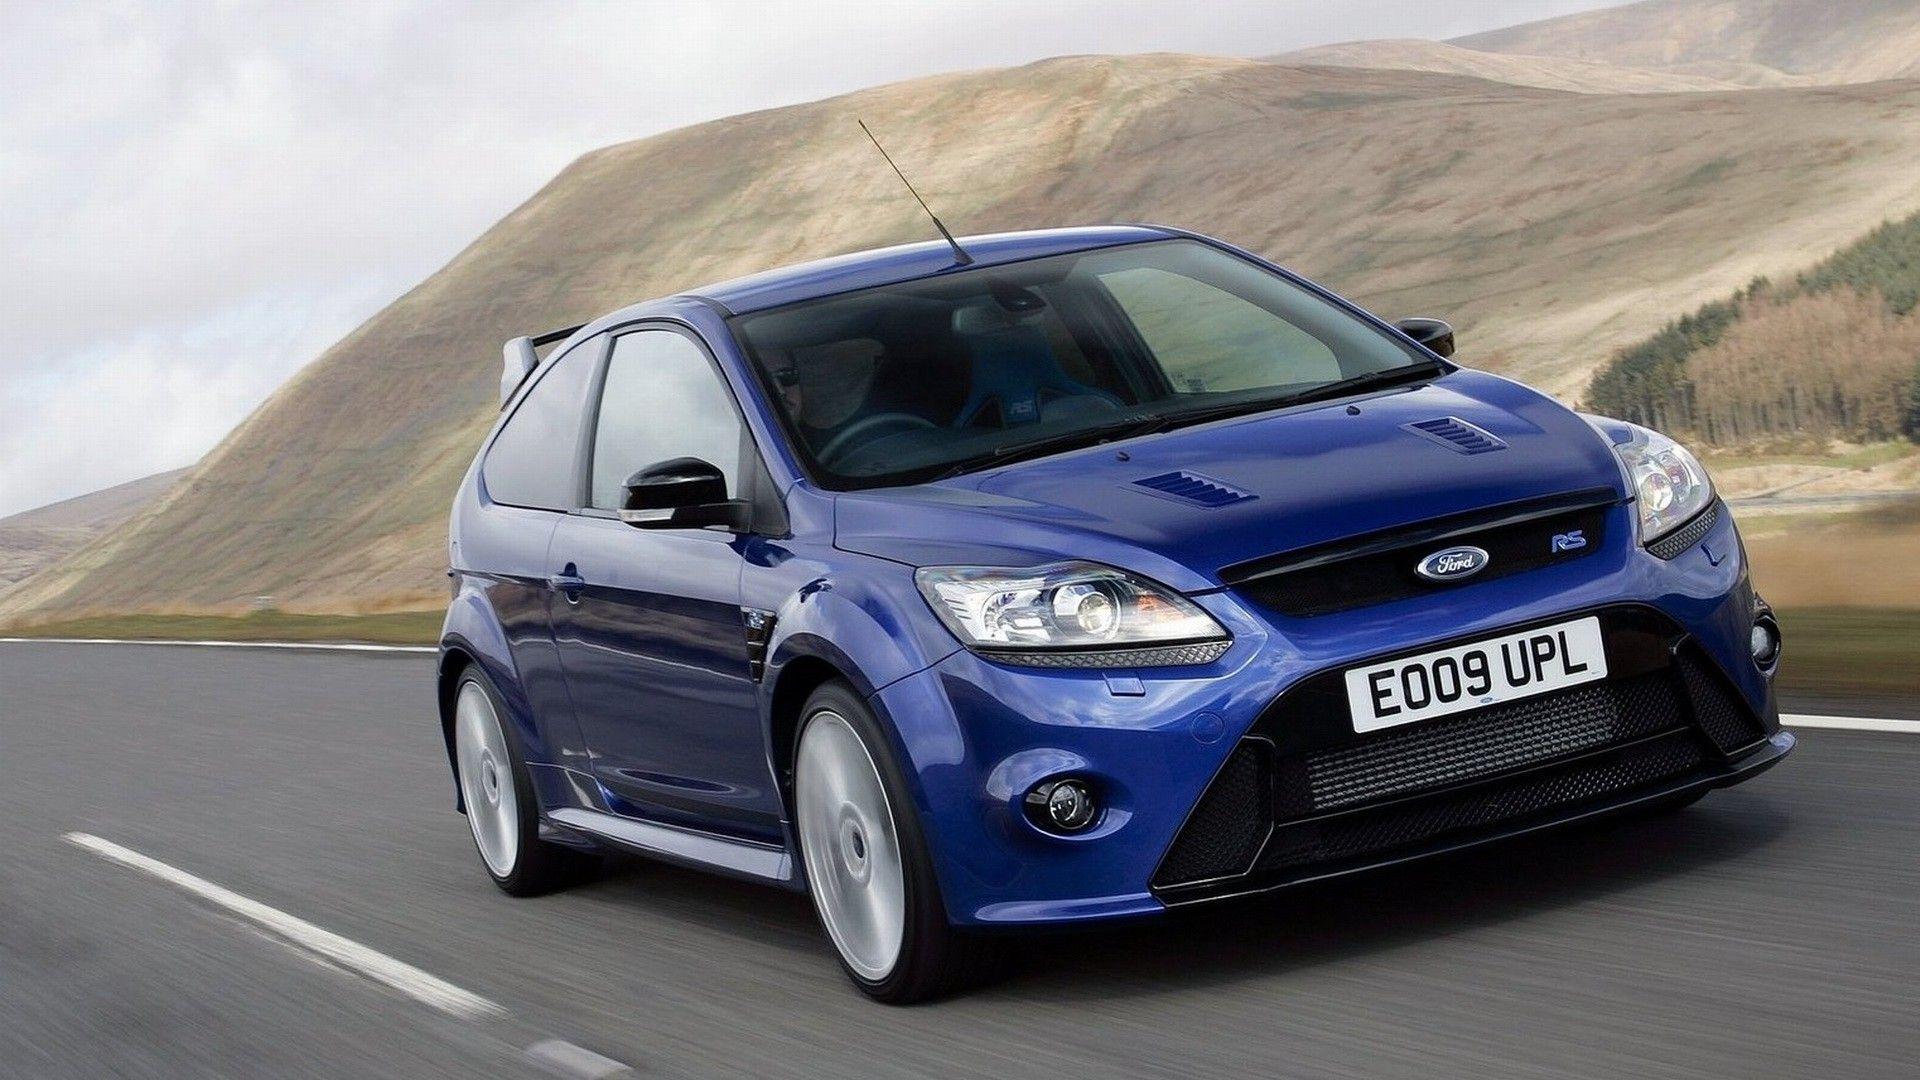 Wallpaper.wiki Ford Focus St Blue Wallpaper Hd PIC WPB004424